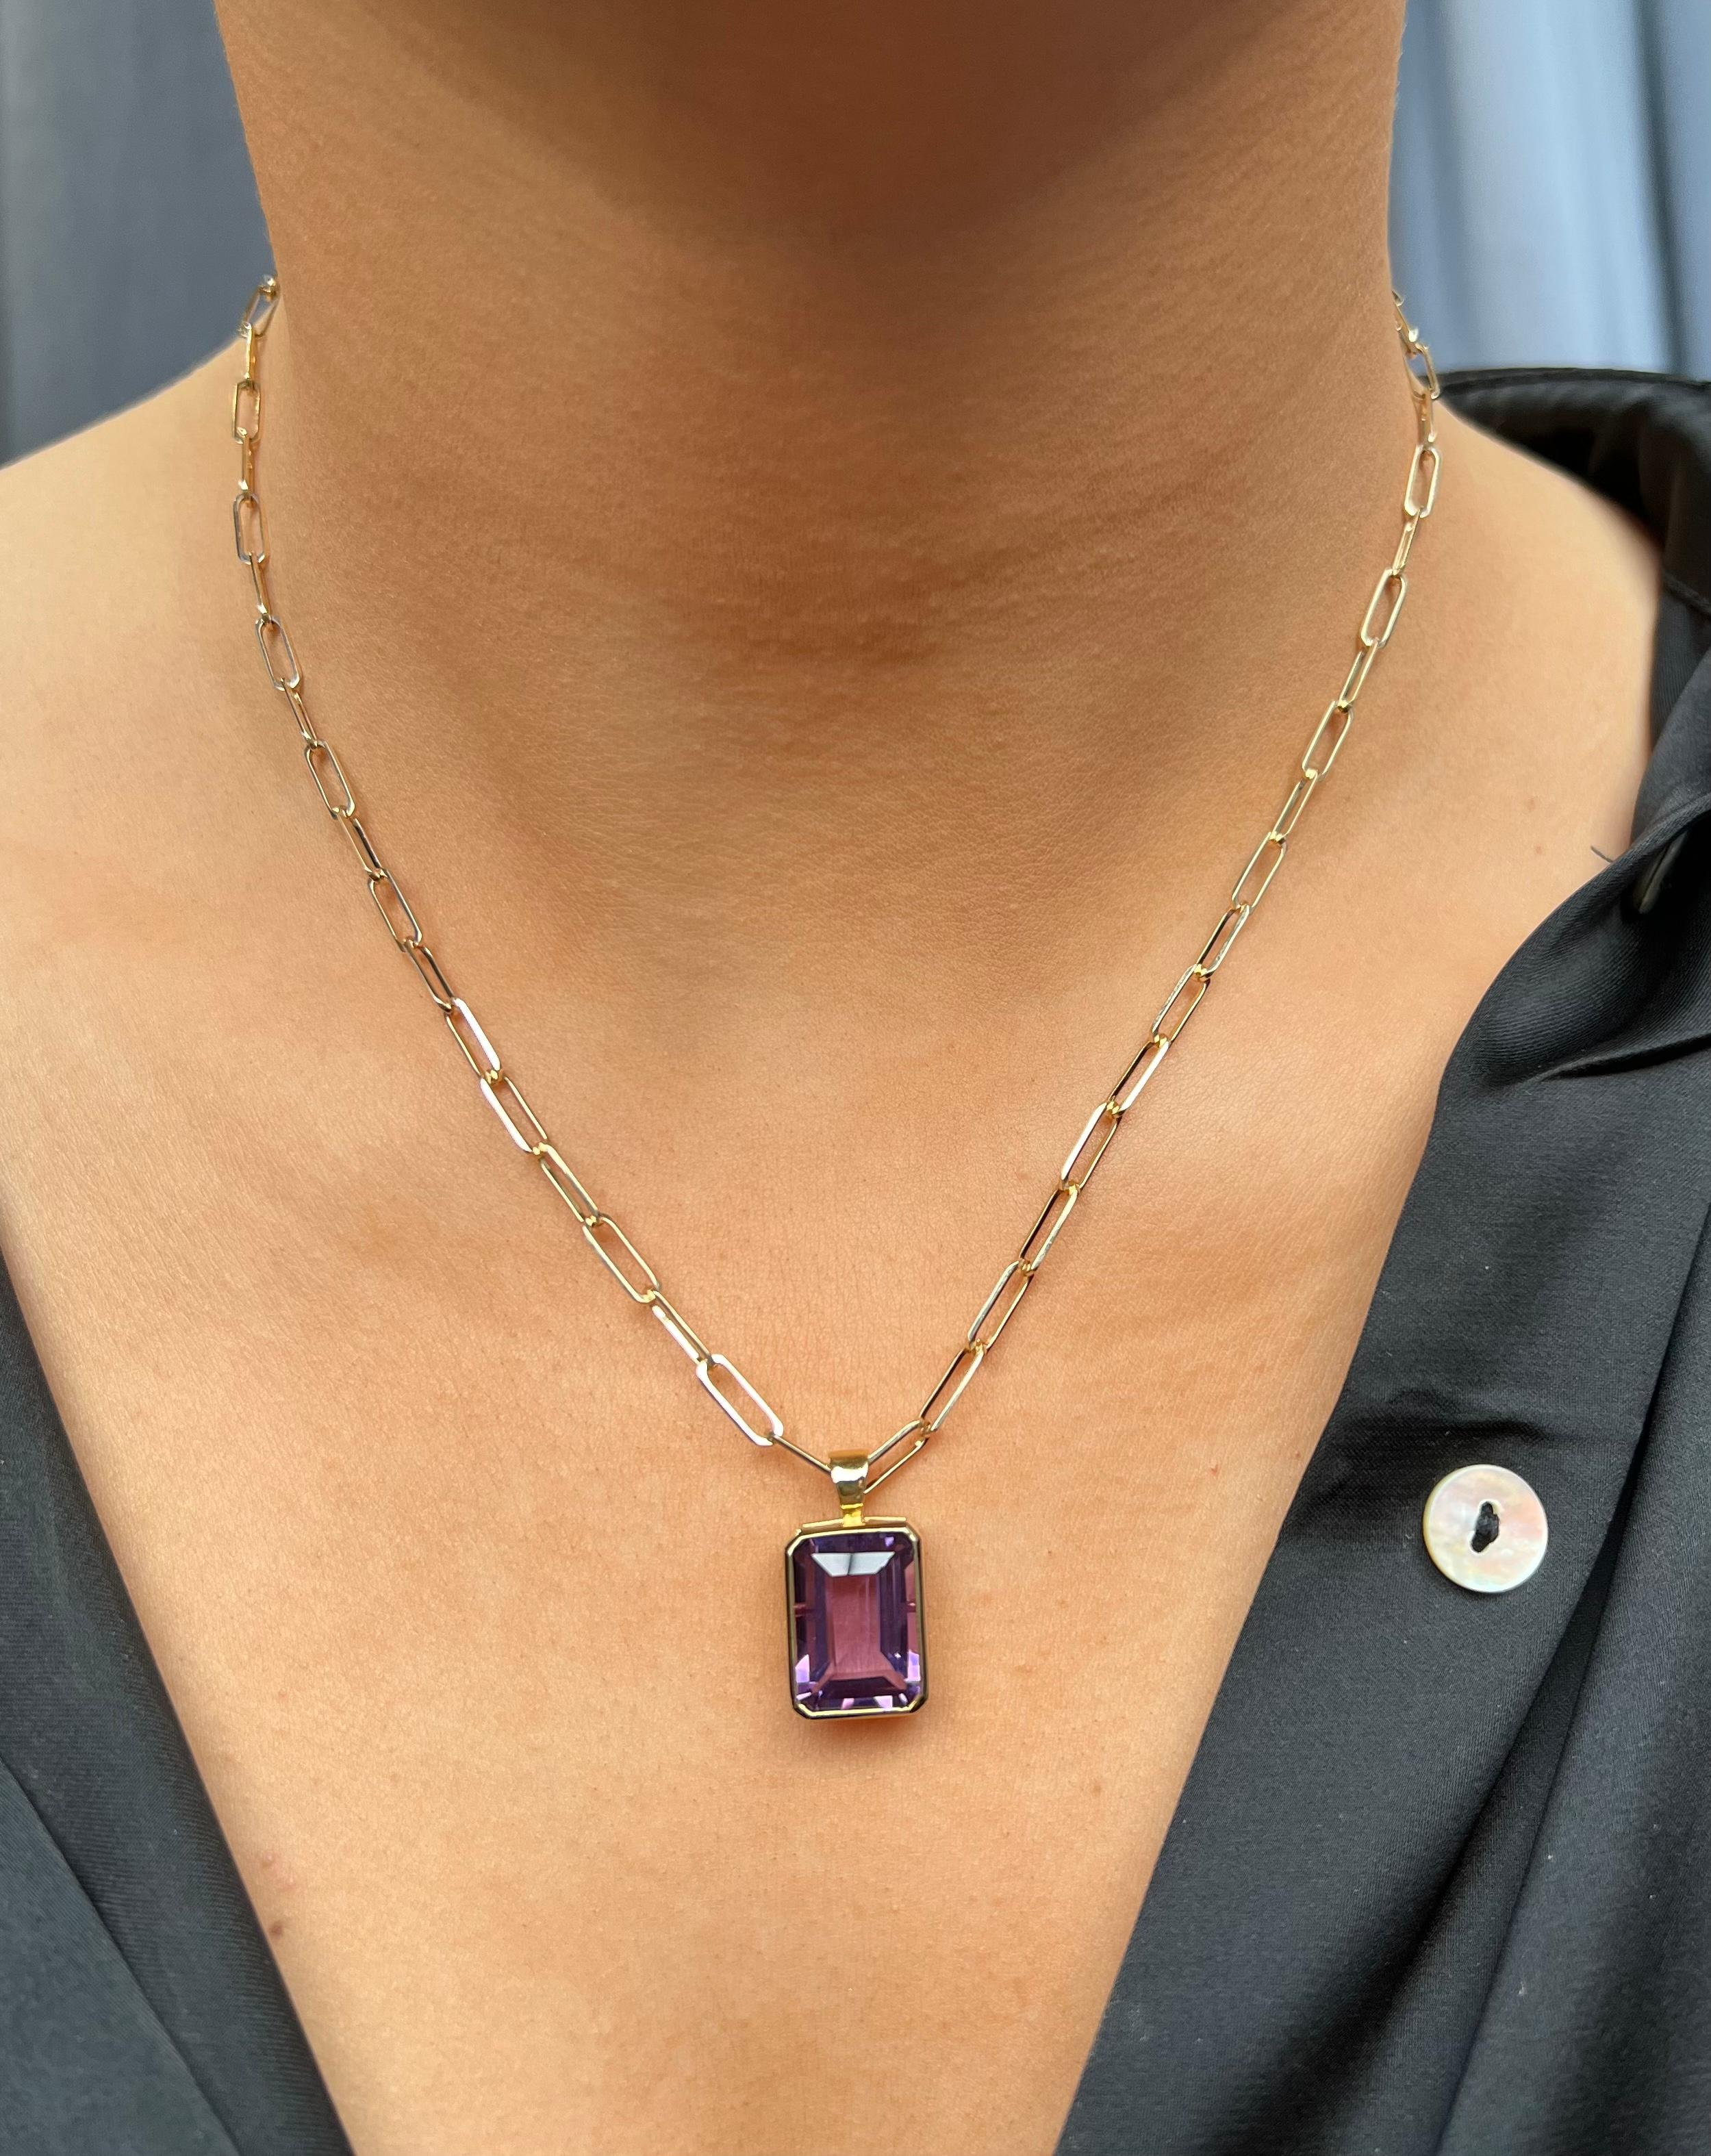 Women's 12ct Amethyst Pendant on a 14k yellow gold paperclip necklace - New Handmade